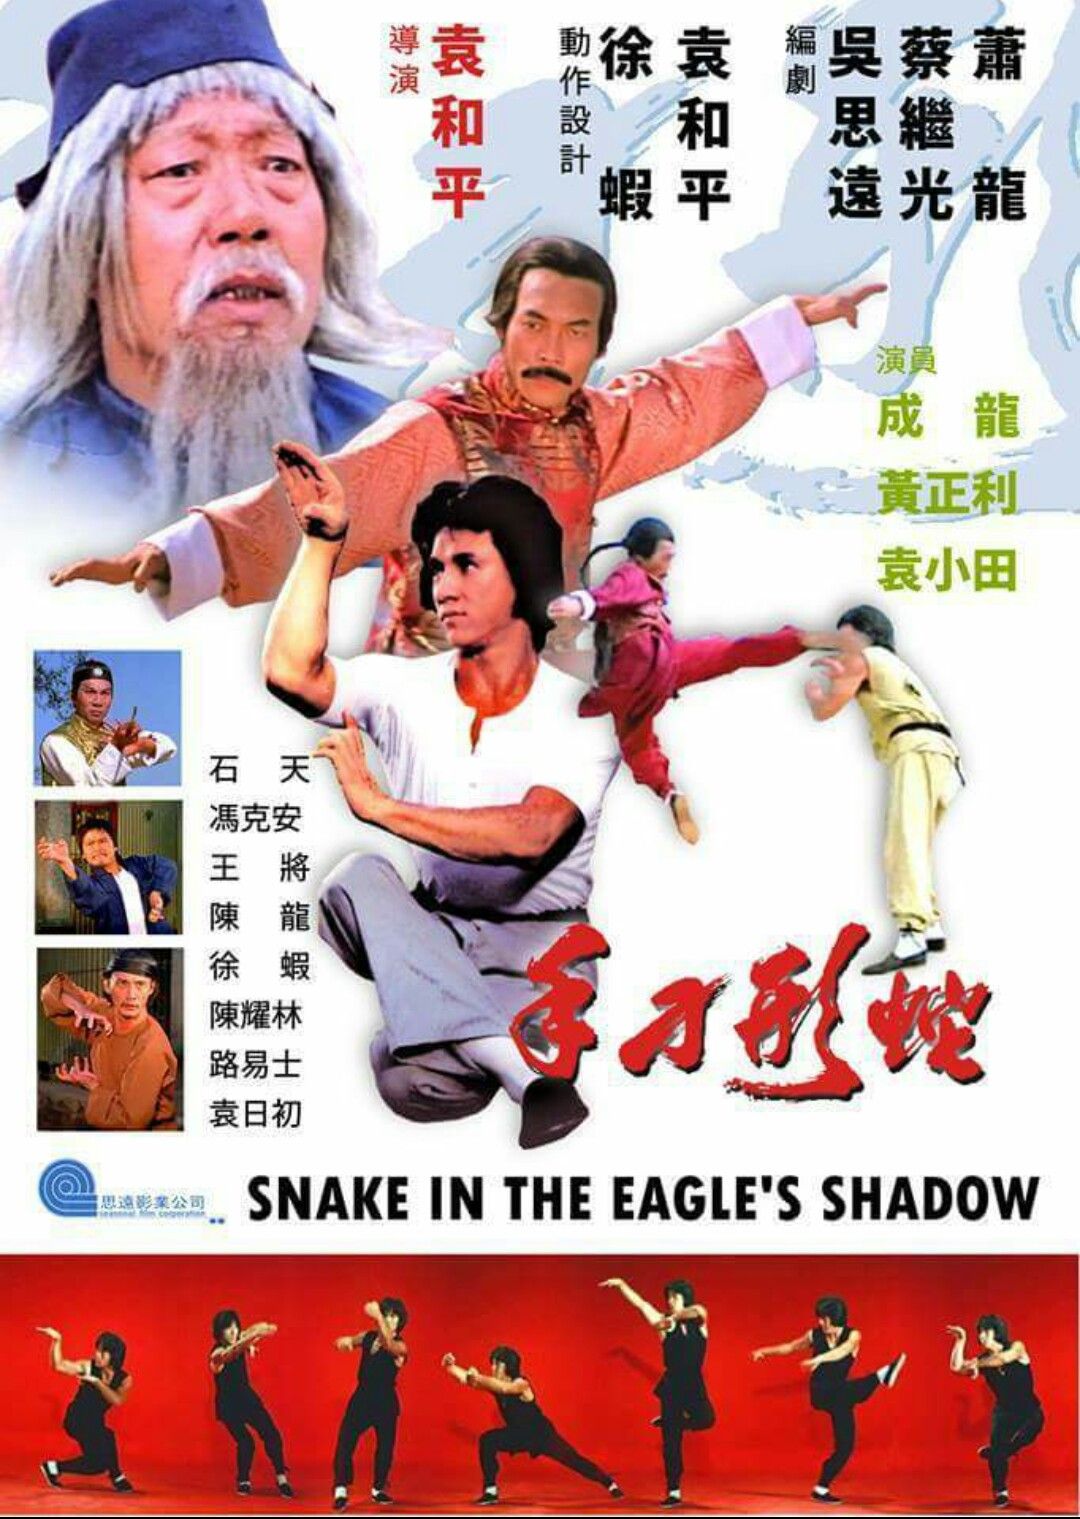  Snake in the Eagle's Shadow (1972)